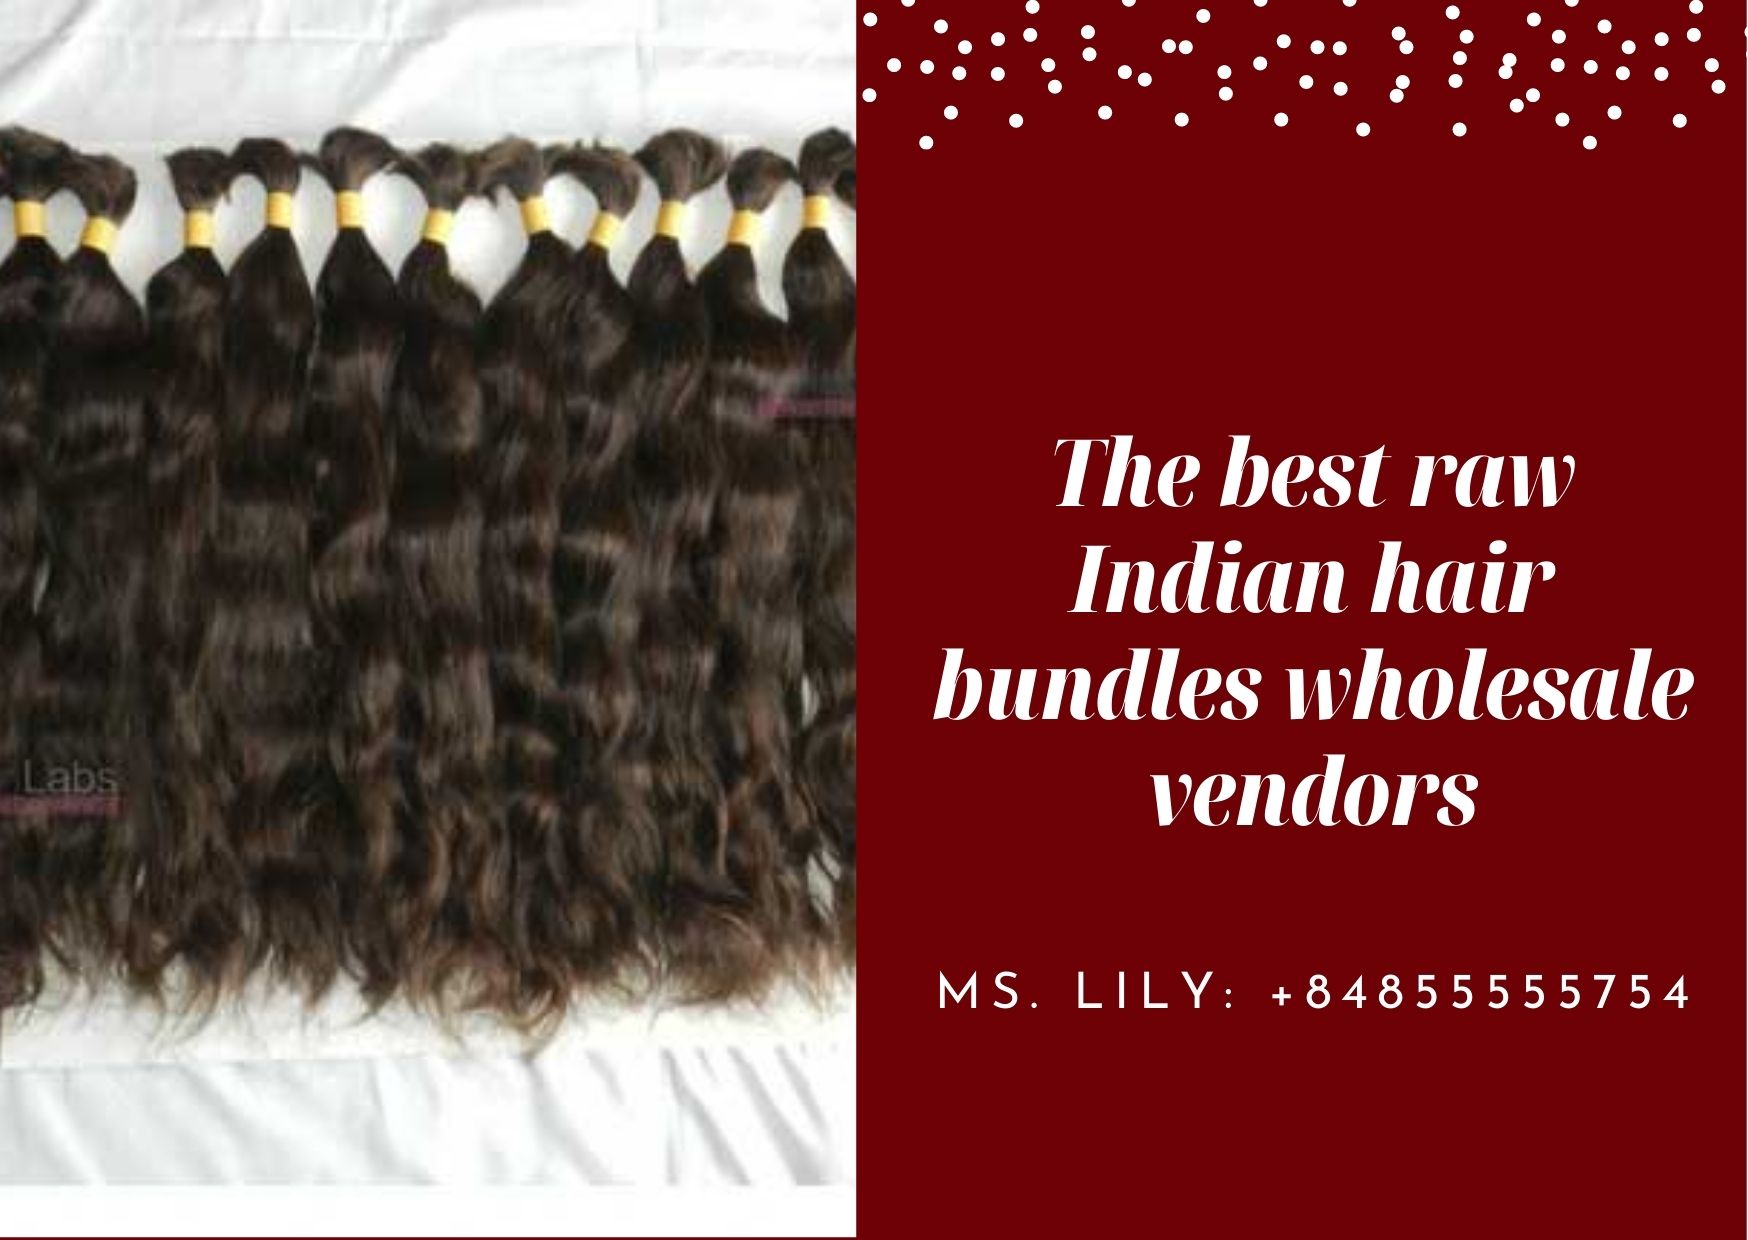 Whether raw Indian hair bundles wholesale is the best option